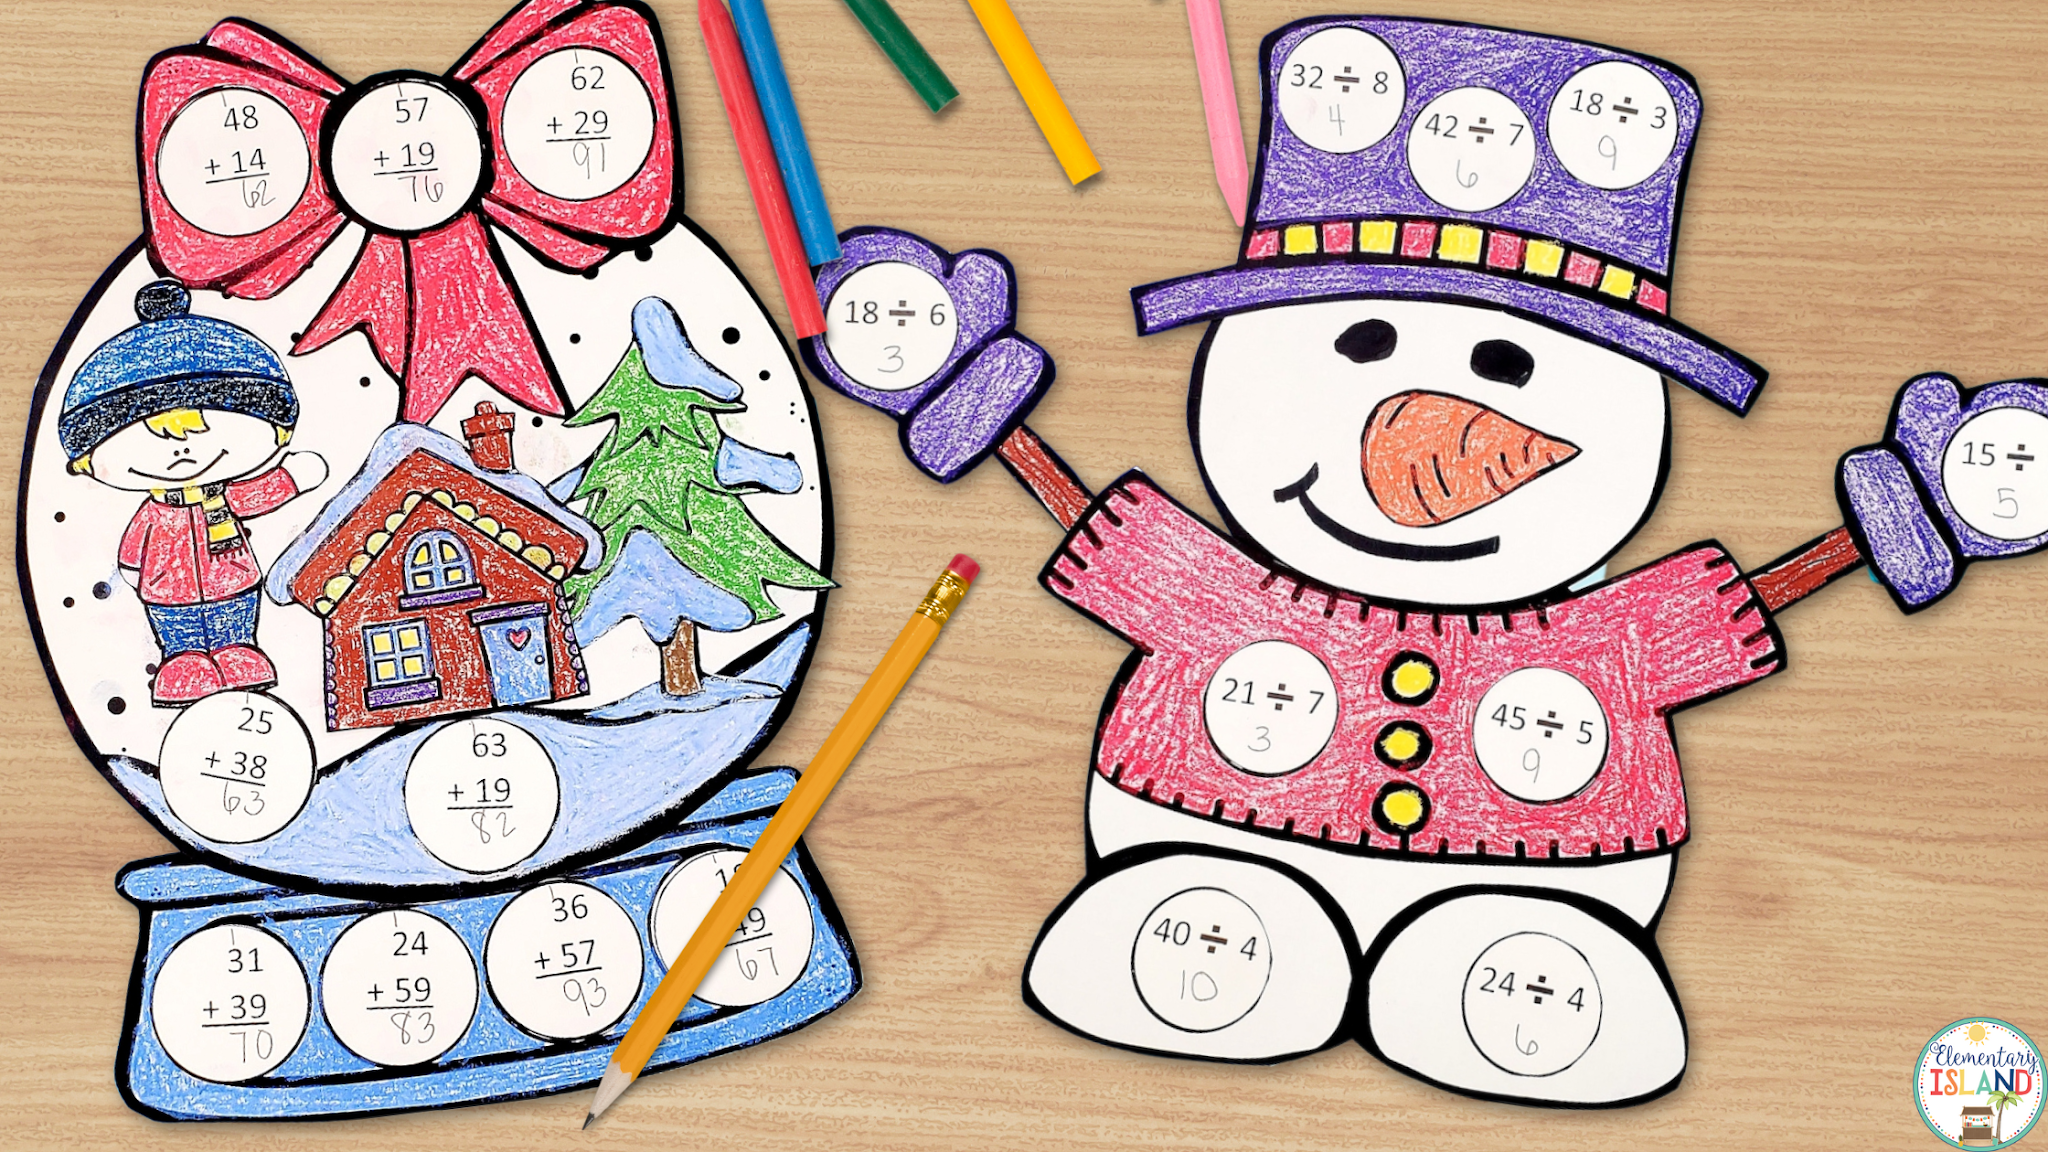 Everything you need to have your students complete this fun math craftivity is included in this time saving resource.